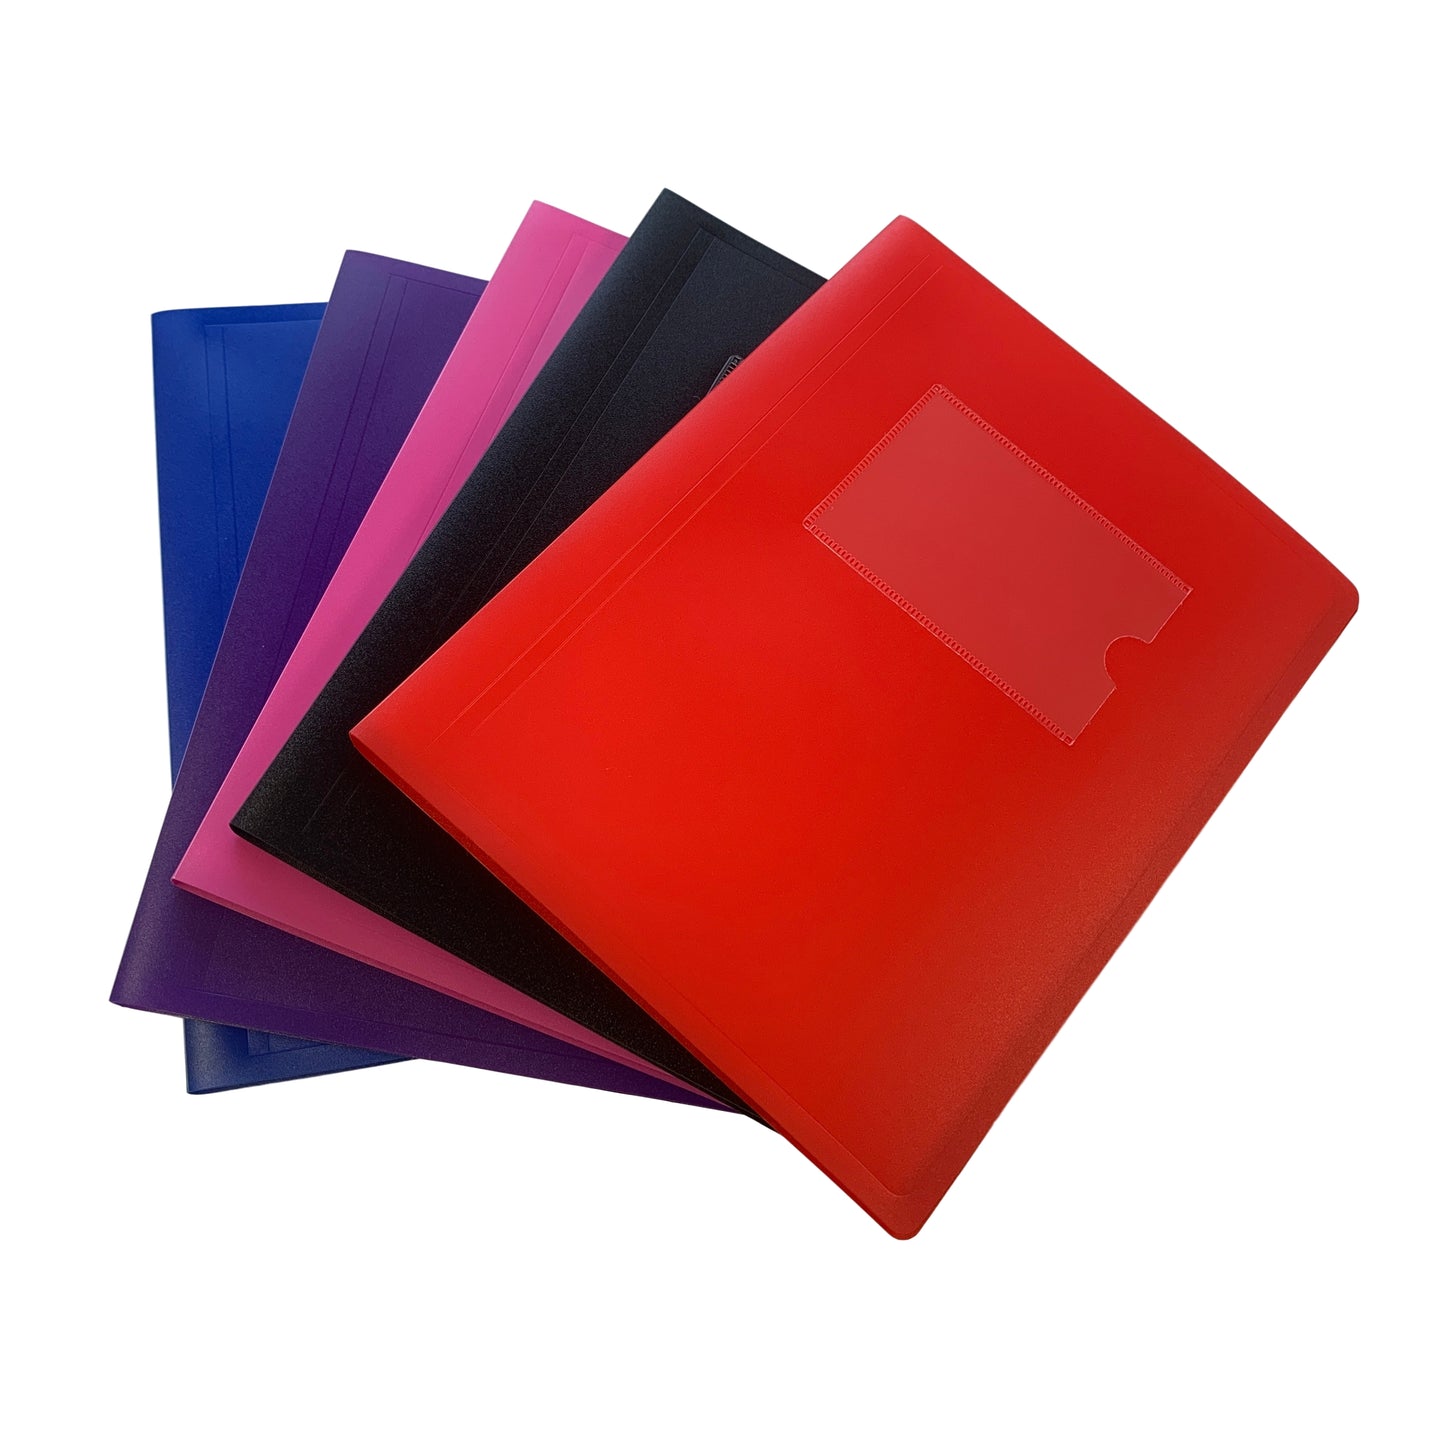 A5 Purple Flexible Cover 40 Pocket Display Book